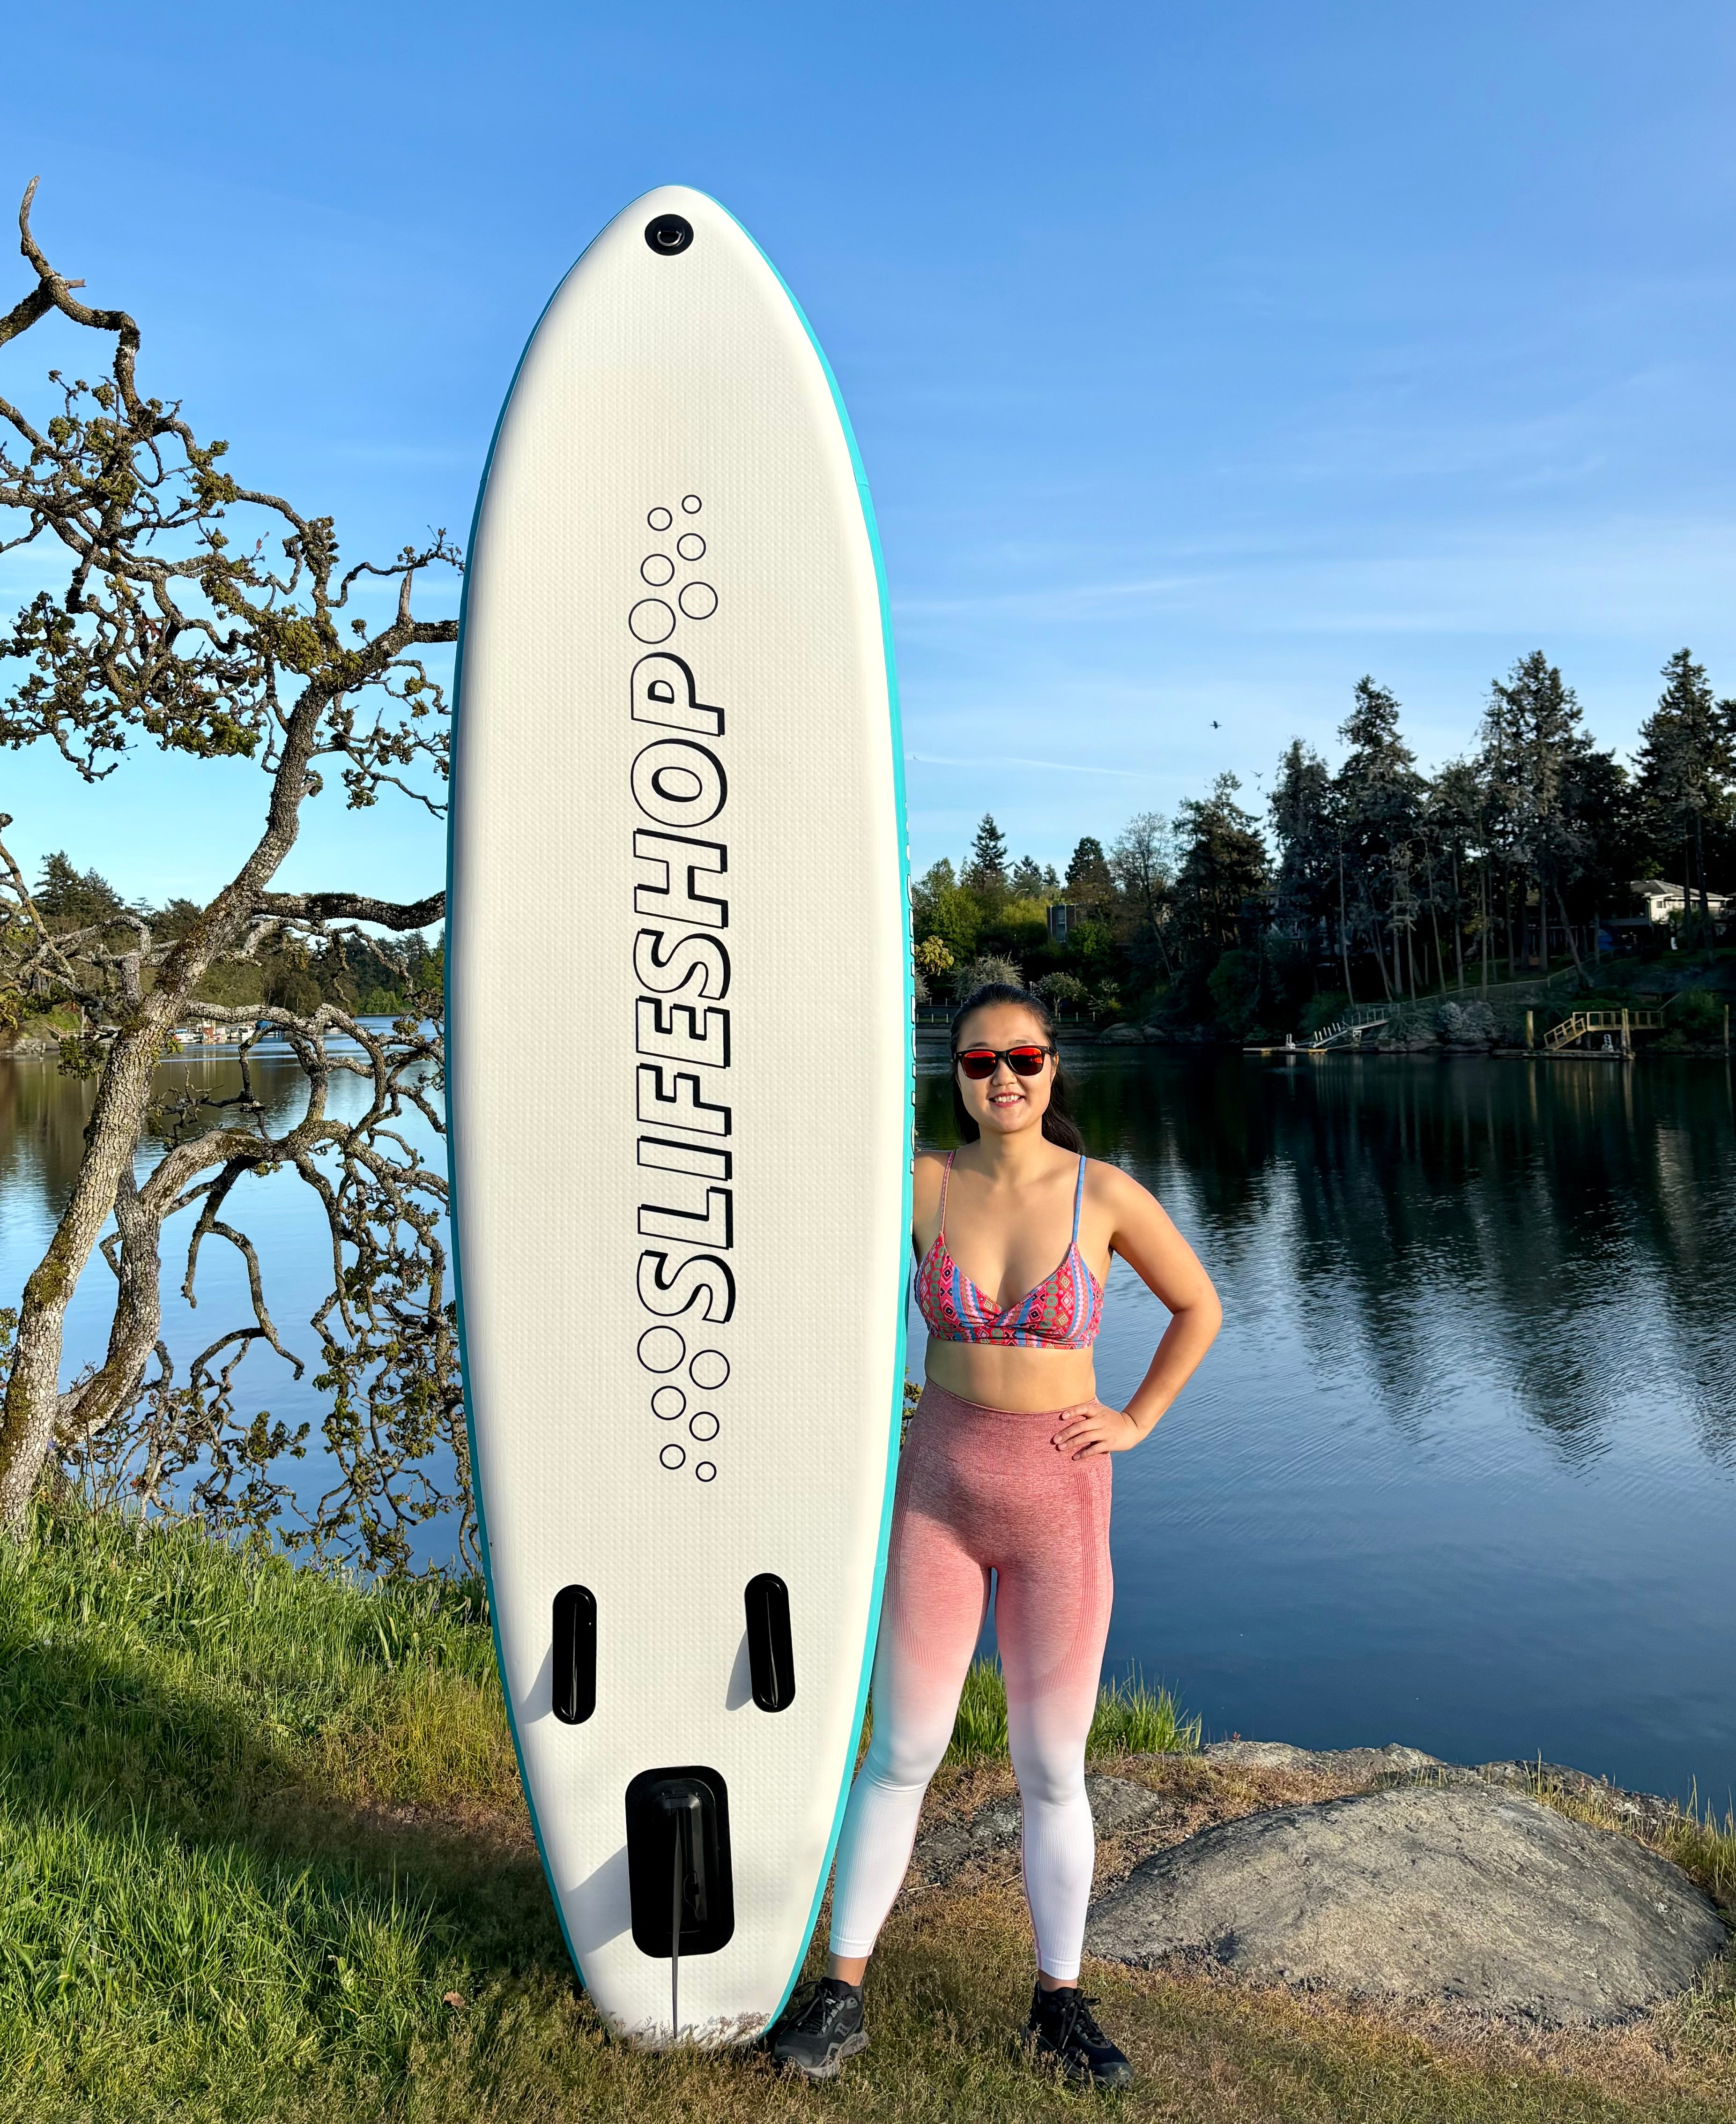 Slifeshop Teal Adventurer Stand Up Paddle Board SUP  Inflatable SUP Designed by Local Canadian Artist 10’